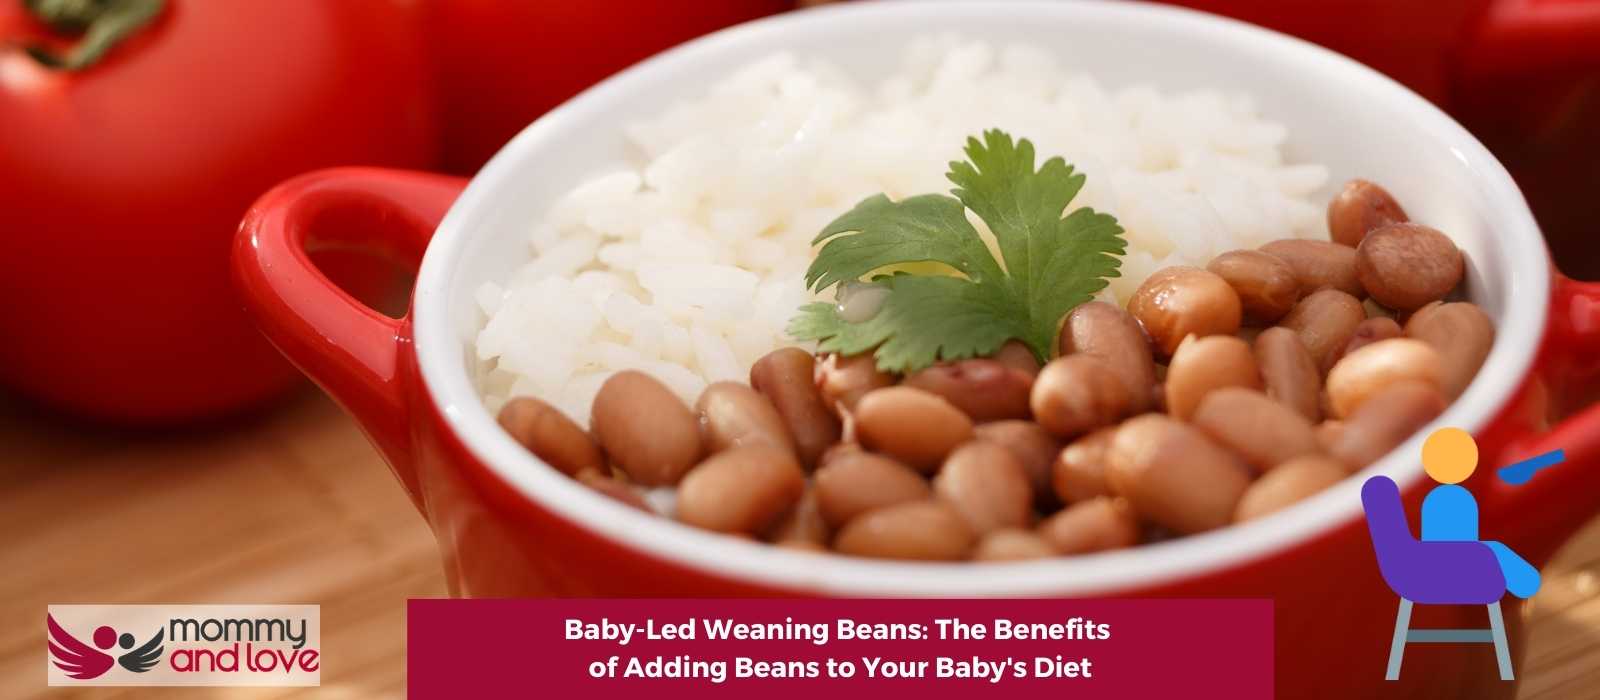 Baby-Led Weaning Beans The Benefits of Adding Beans to Your Baby's Diet